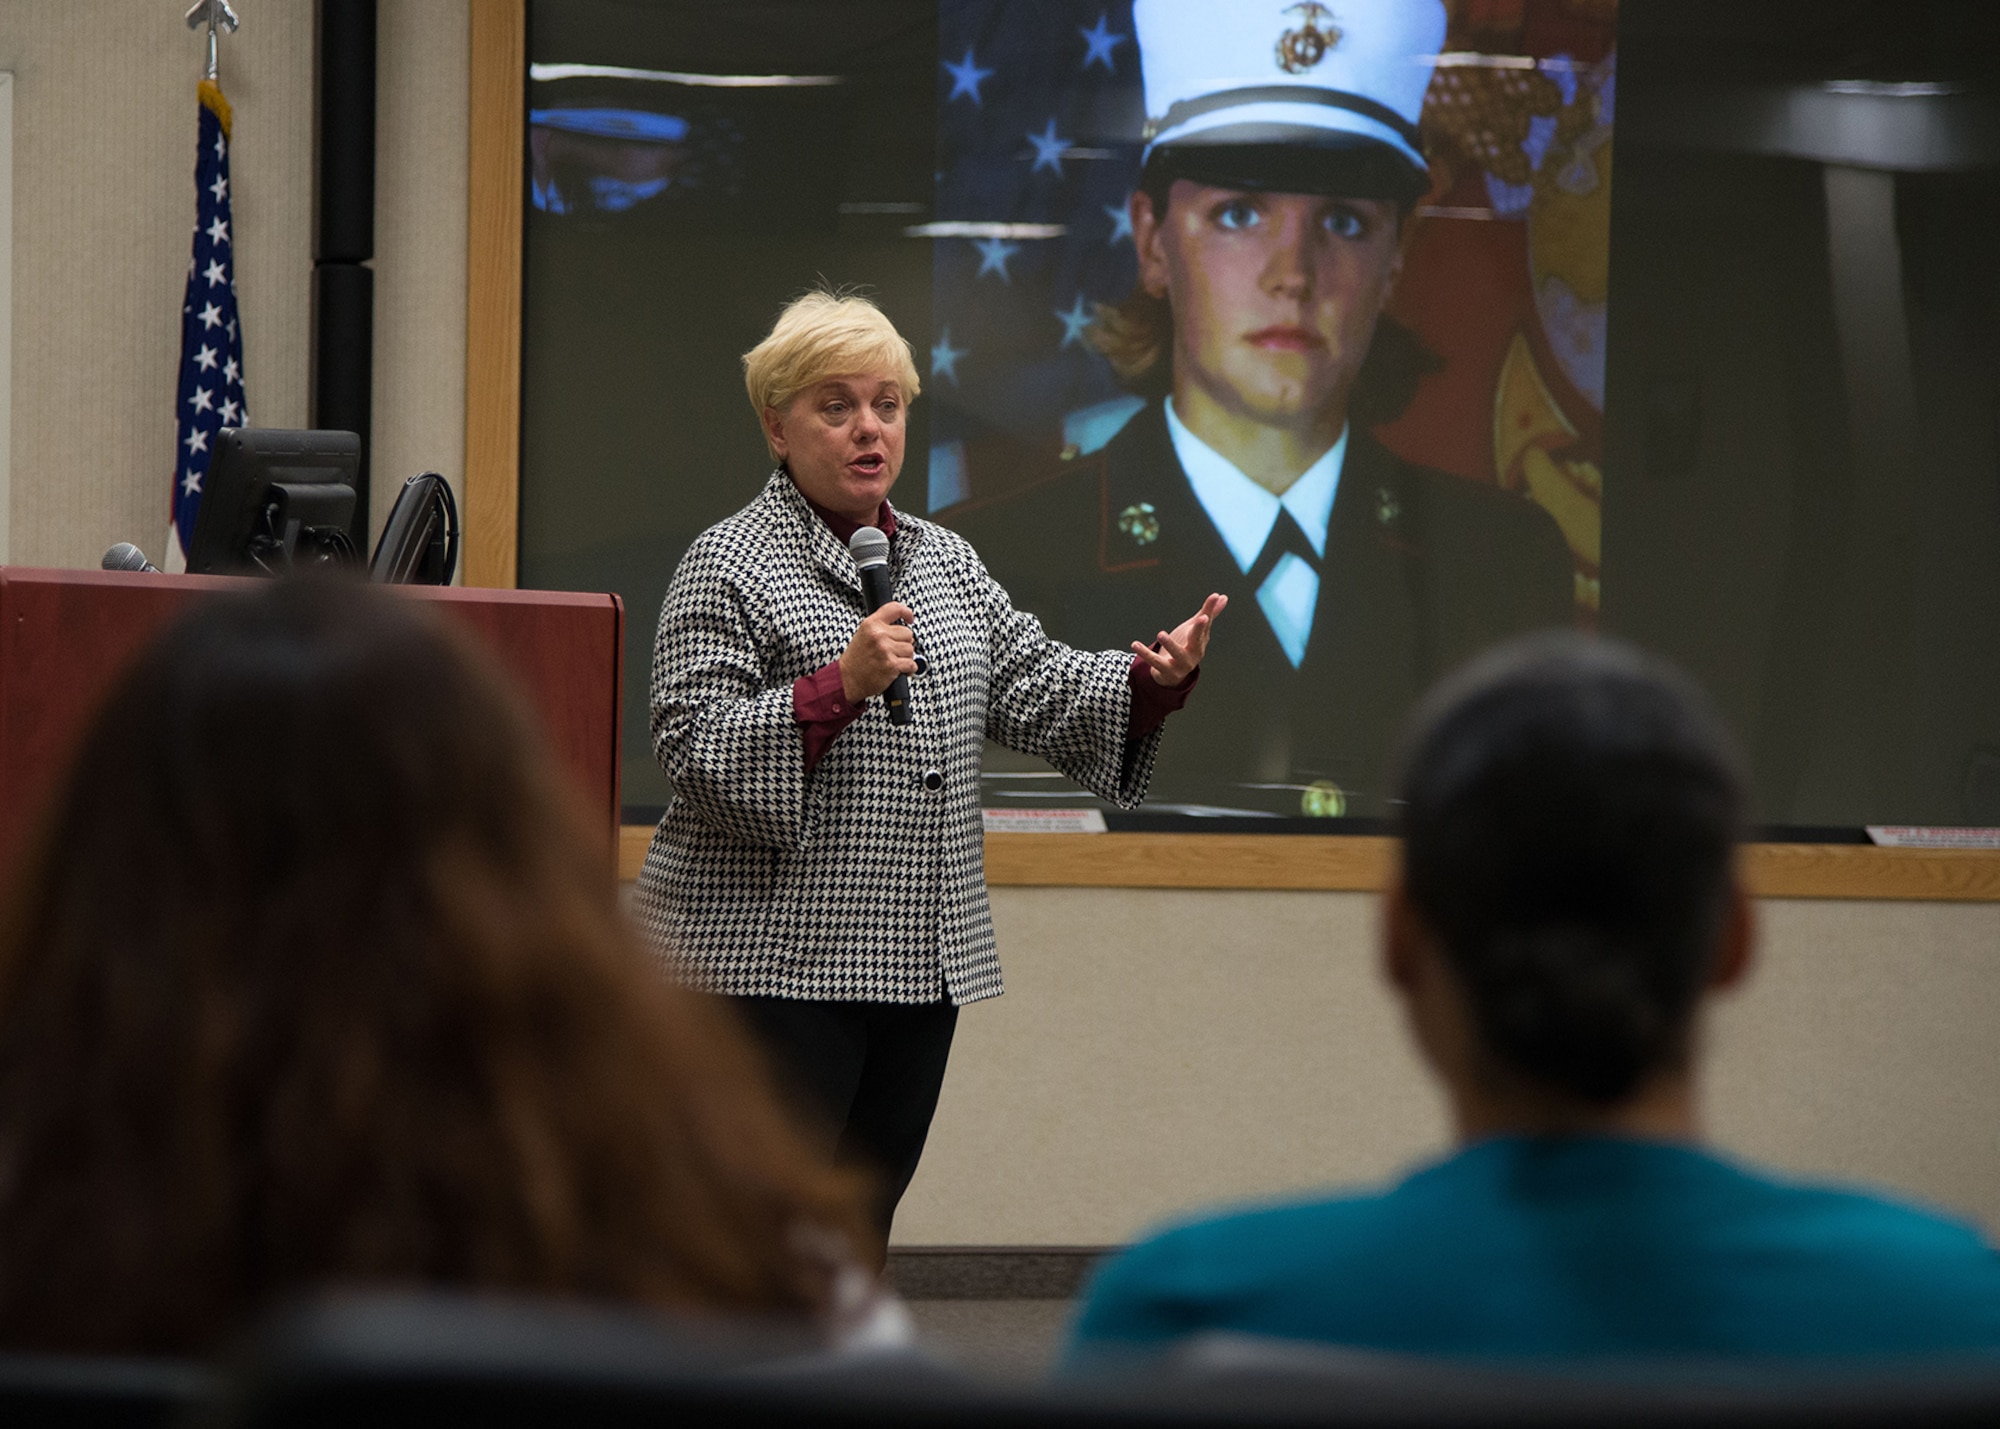 Mary Lauterbach, the mother of U.S. Marine Lance Cpl. Maria Lauterbach, speaks to base personnel about her daughter's death during a presentation at the Hanscom Conference Center Sept. 14. Her presentation, The Story of a Mother's Loss to Sexual Assault, told her daughter's story and how it helped to launch the Defense Department’s Expedited Transfer Program where survivors are afforded the opportunity to quickly relocate. (U.S. Air Force photo by Mark Herlihy)